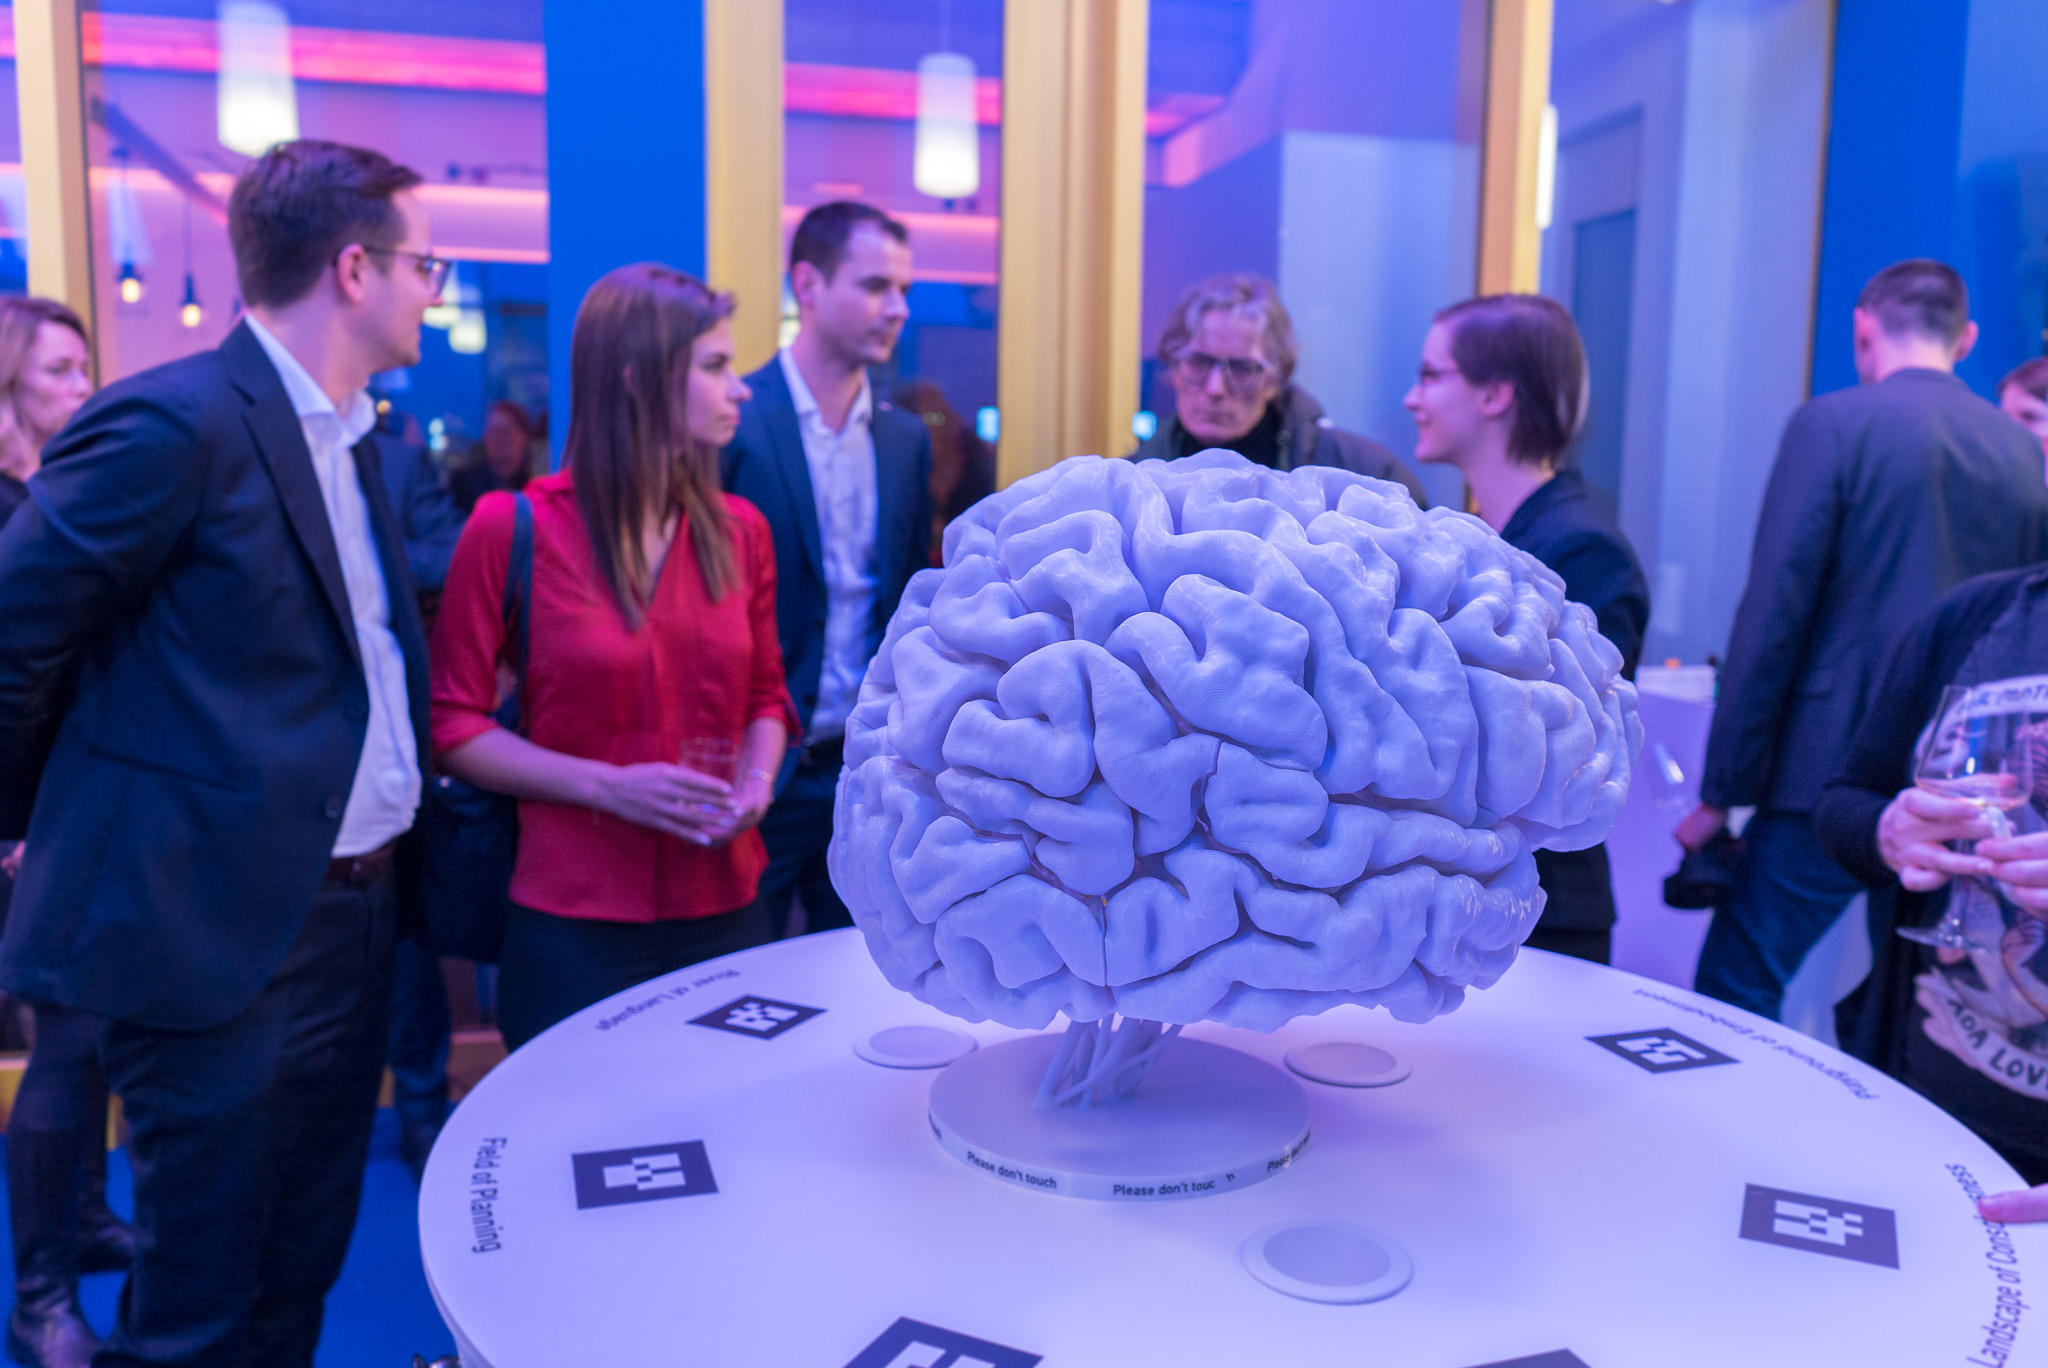 Guests at ETH event around a model of the brain.